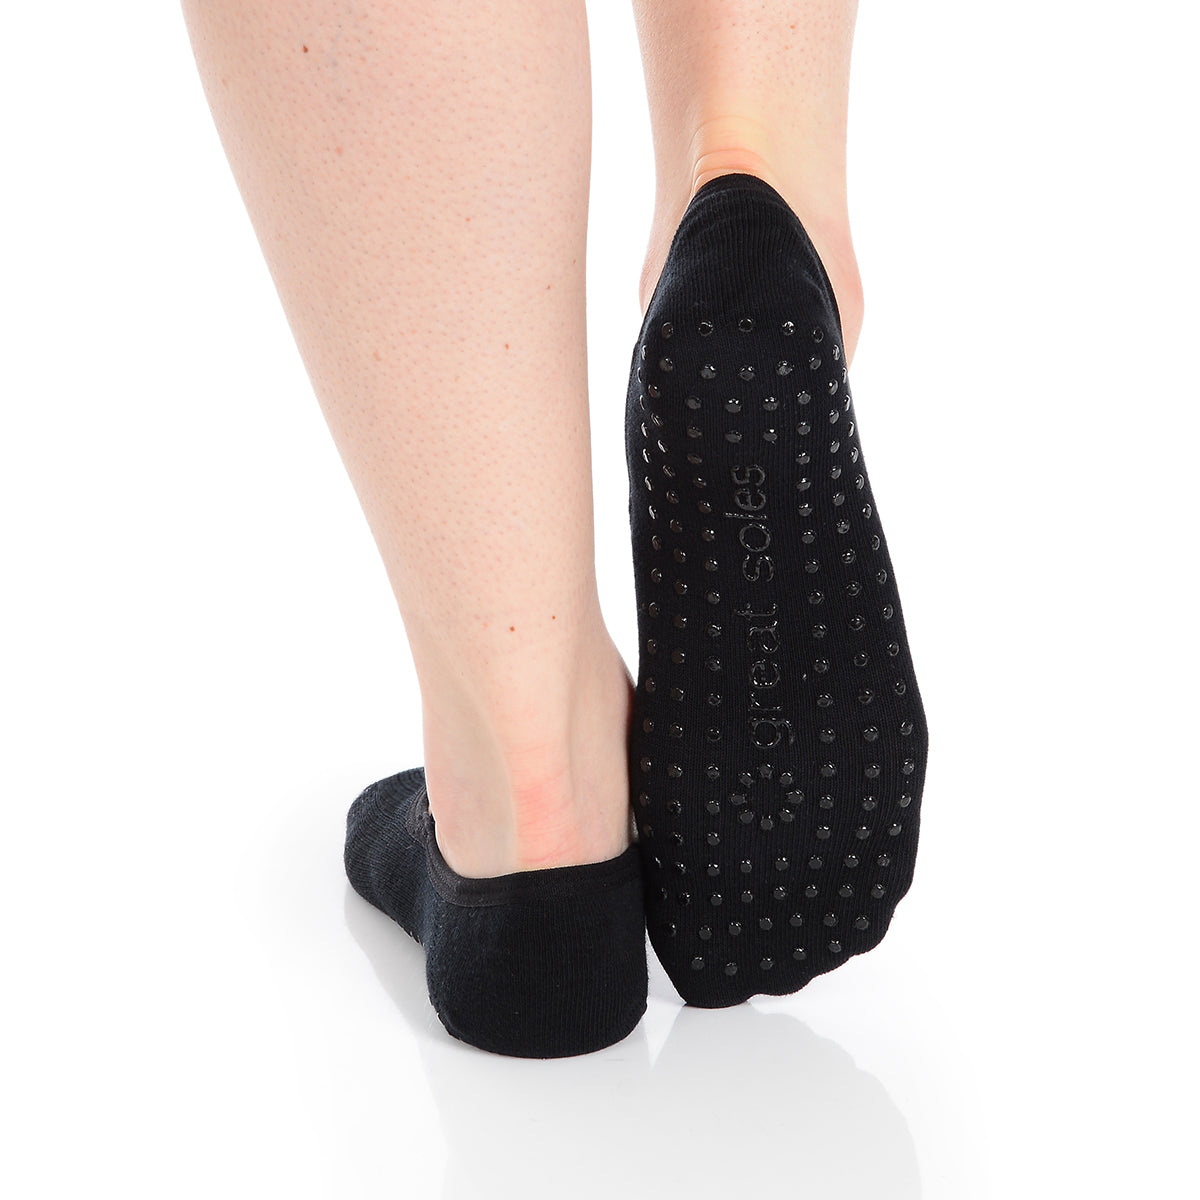 Mia mesh light weight non slip ballet grip sock for barre, pilates,and yoga